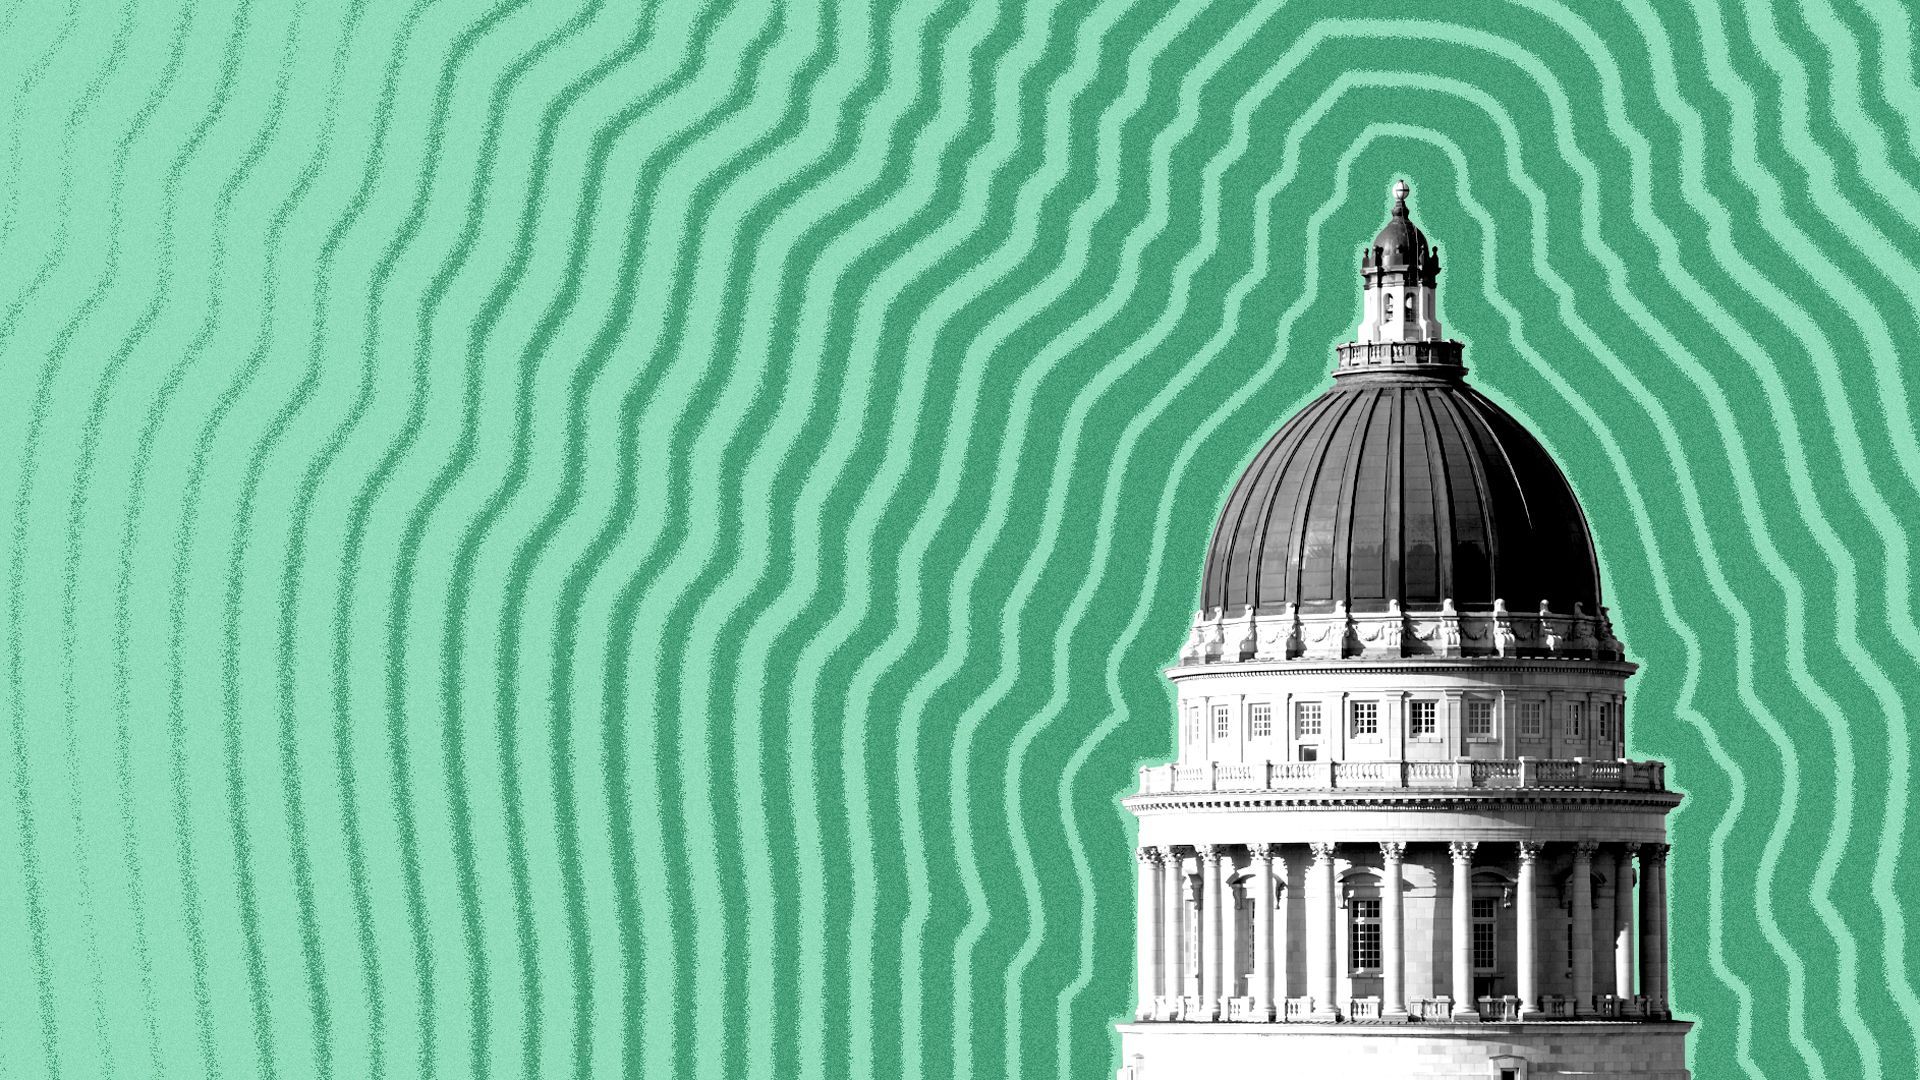 Illustration of the Utah State Capitol with lines radiating from it.